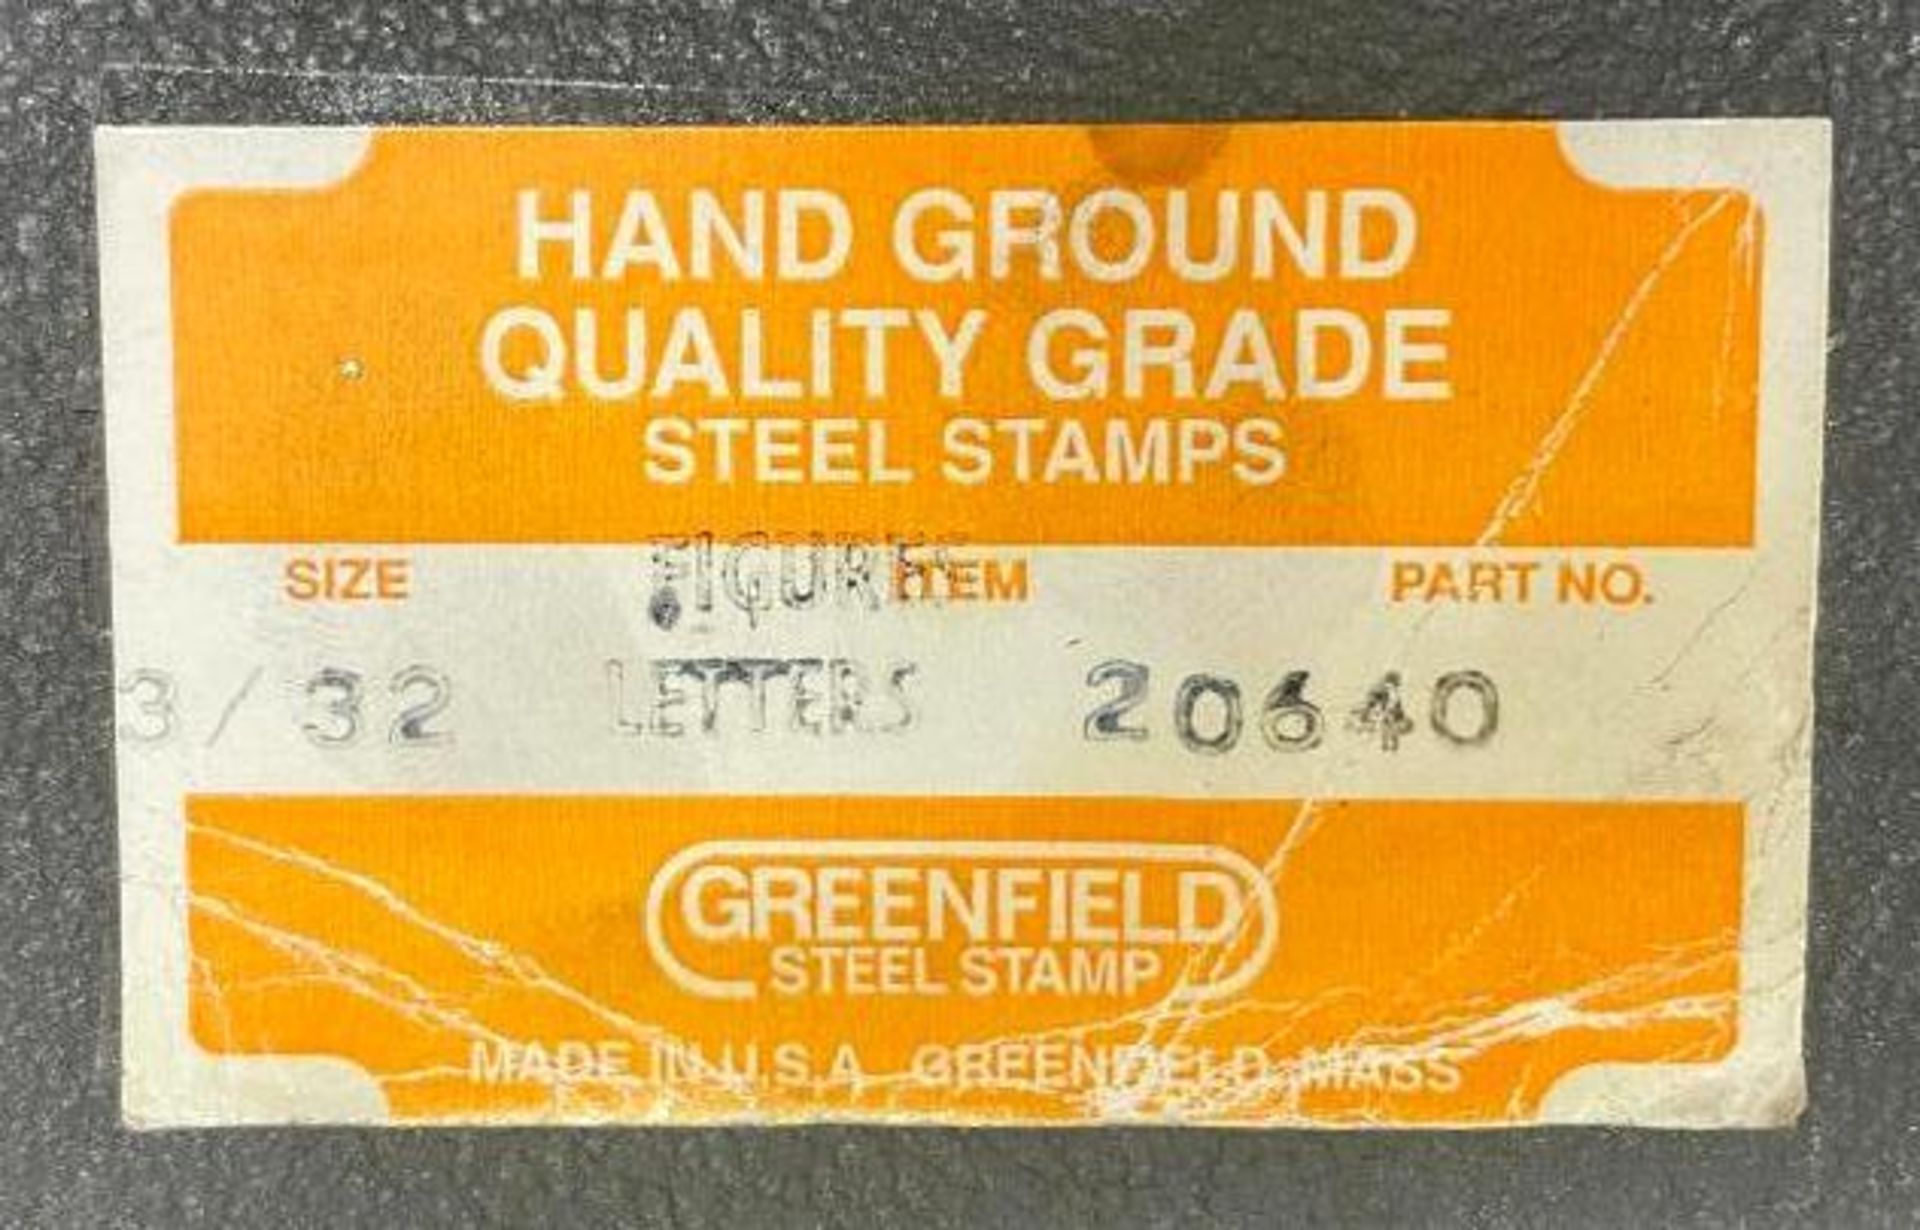 HAND GROUND QUALITY GRADE STEEL STAMPS BRAND/MODEL: GREENFIELD 20640 SIZE: 3/32 QTY: 1 - Image 3 of 4